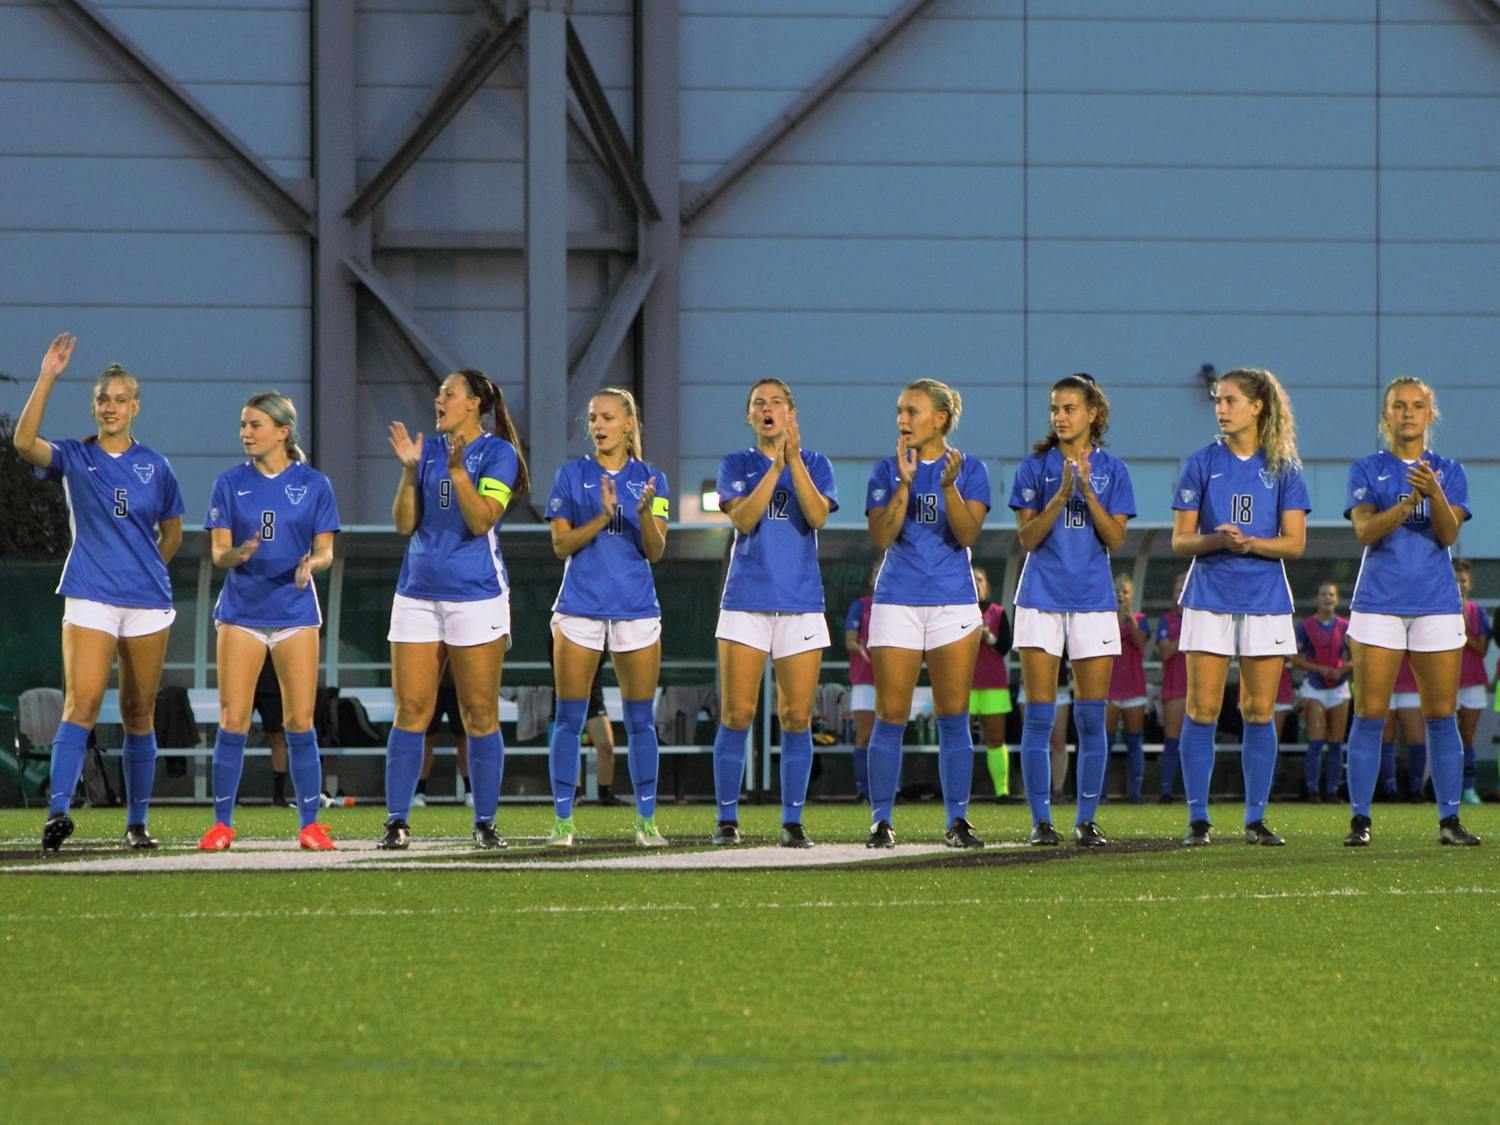 The UB women’s soccer team (3-1-0) traveled to the Bearcats Sports Complex Sunday night where they beat the Binghamton Bearcats 1-0.
